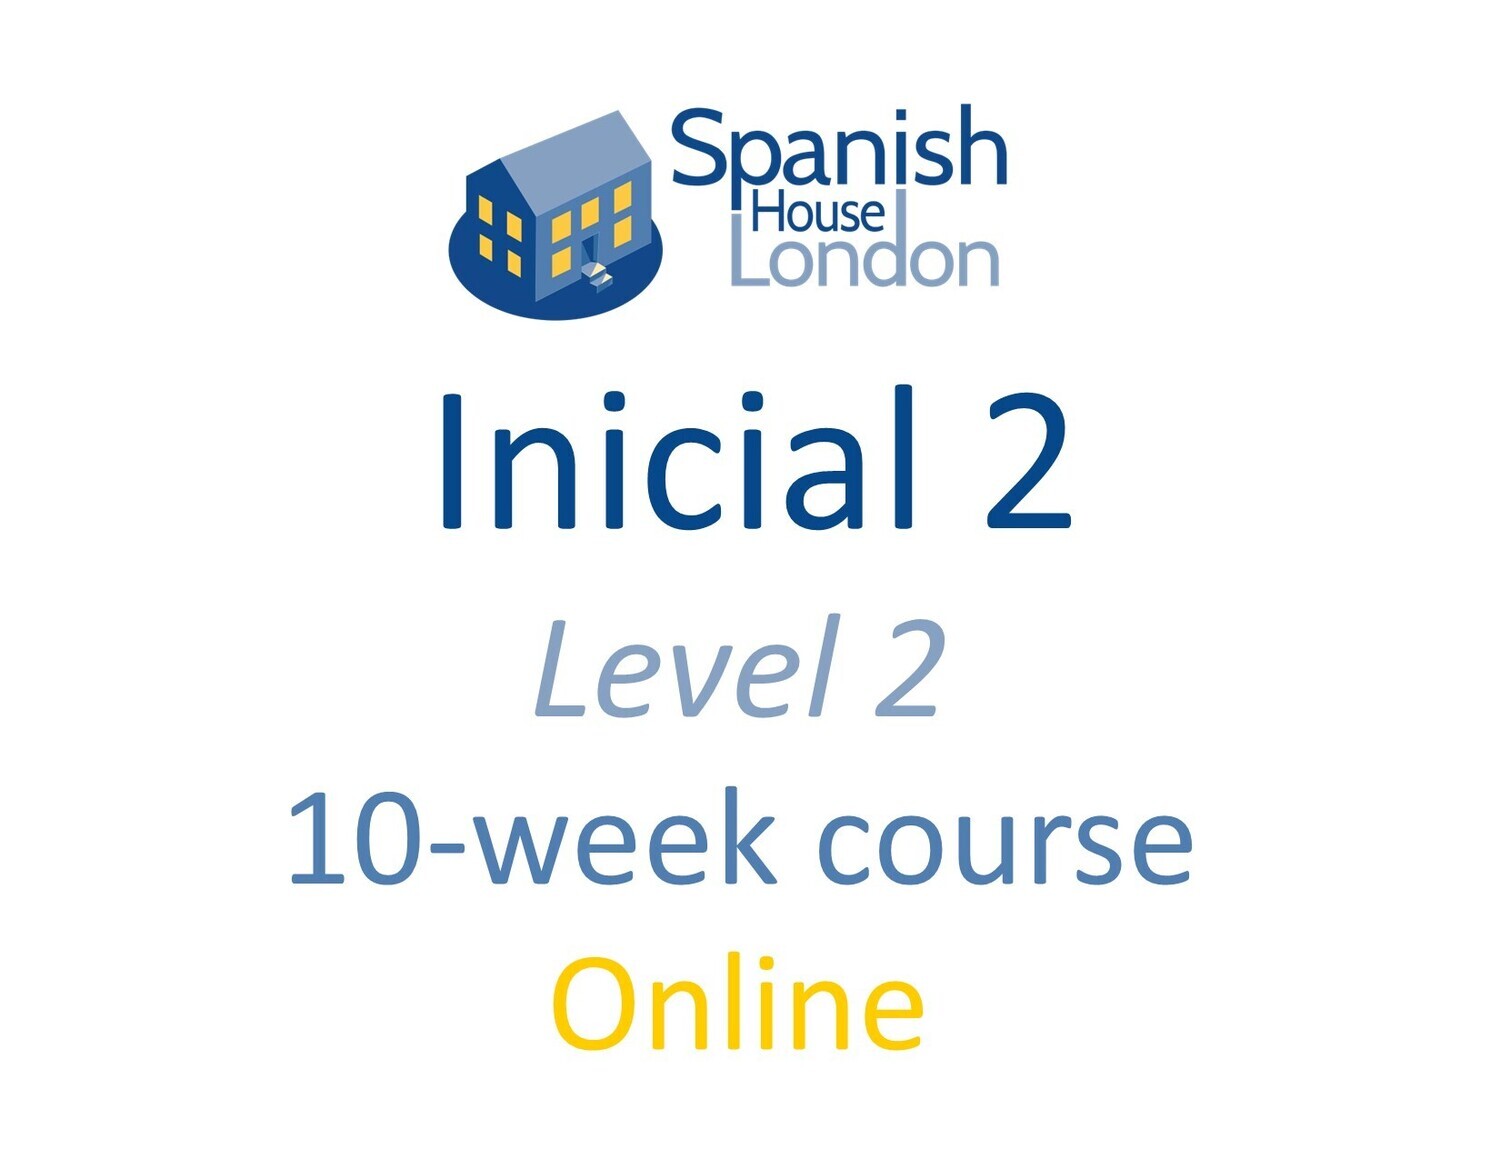 Inicial 2 Course starting on 14th August at 7.30pm Online